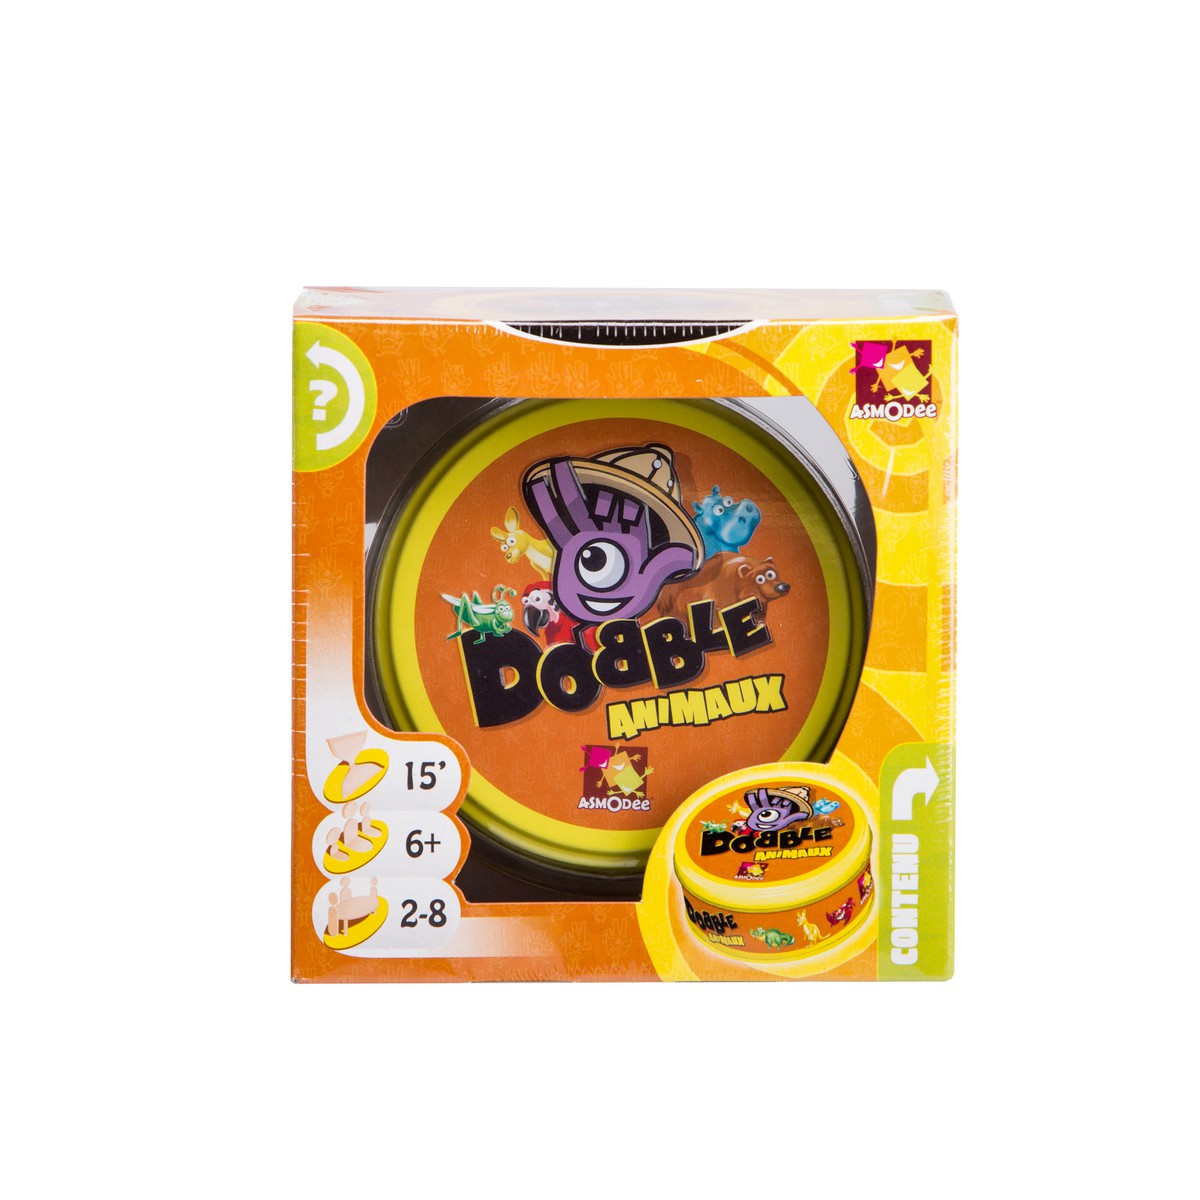 Asmodee France  Dobble animaux  